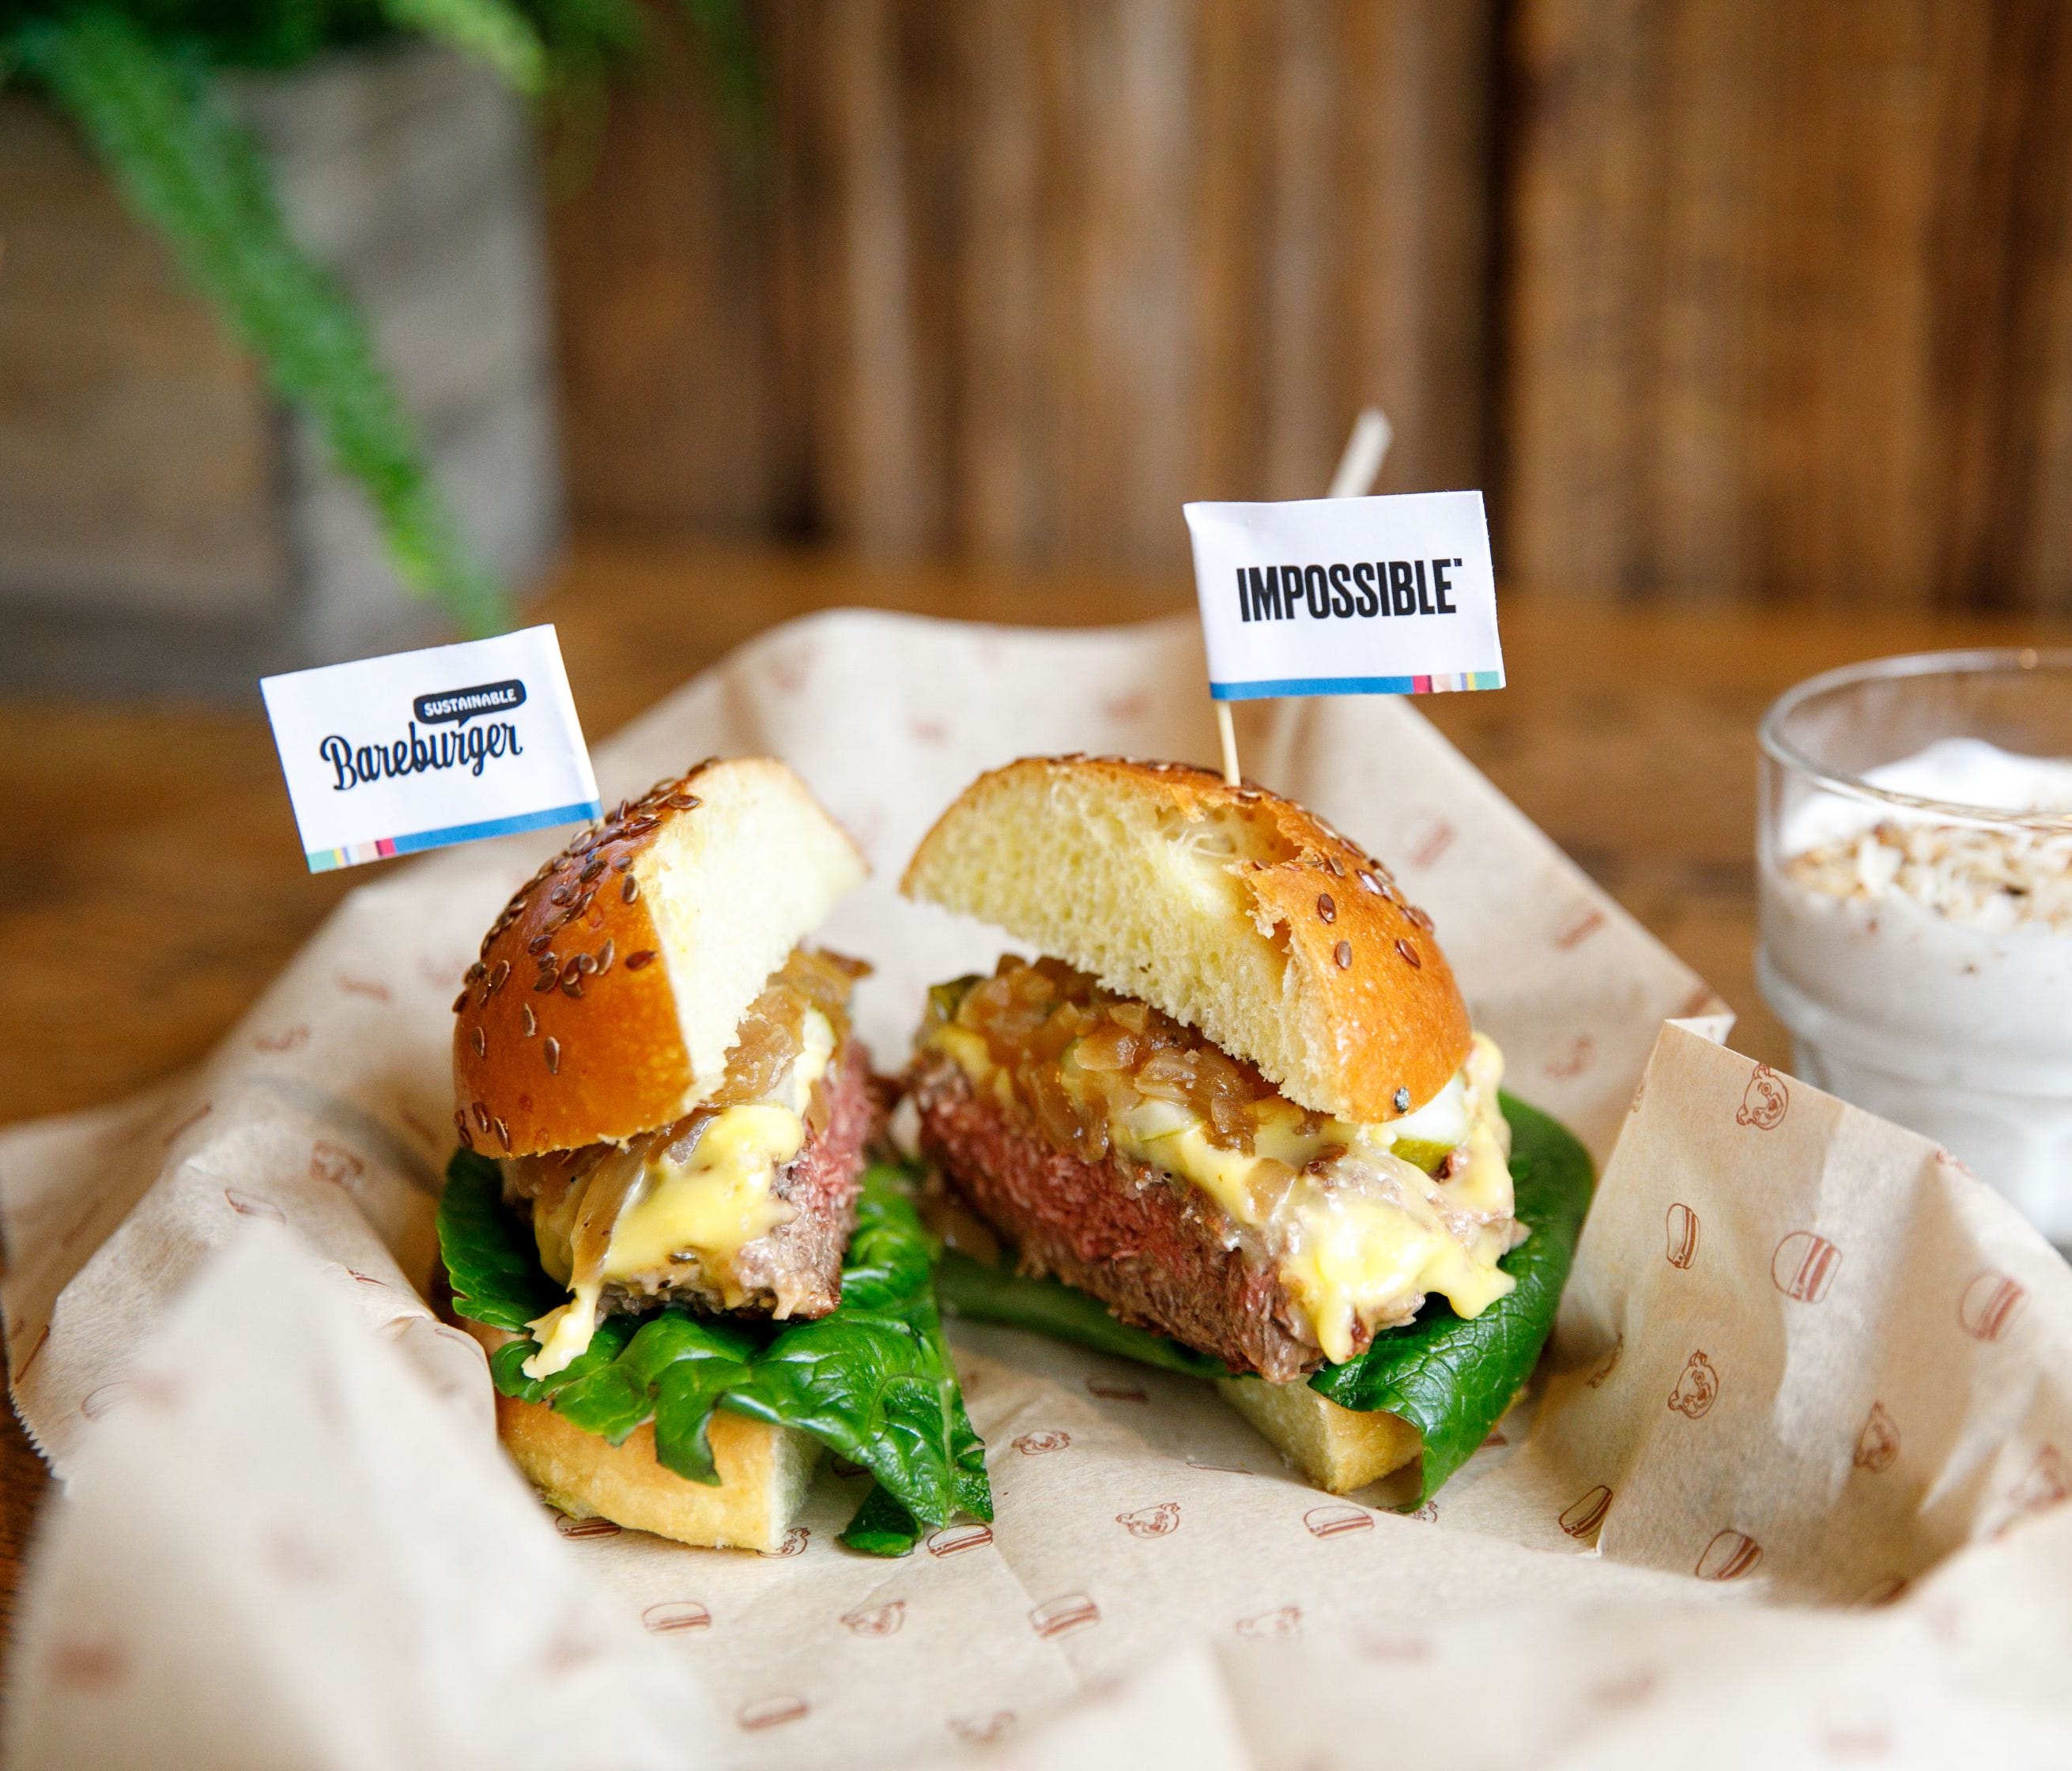 Bareburger, an organic chain with 44 branches worldwide, offers the Impossible Burger at its flagship Manhattan location.